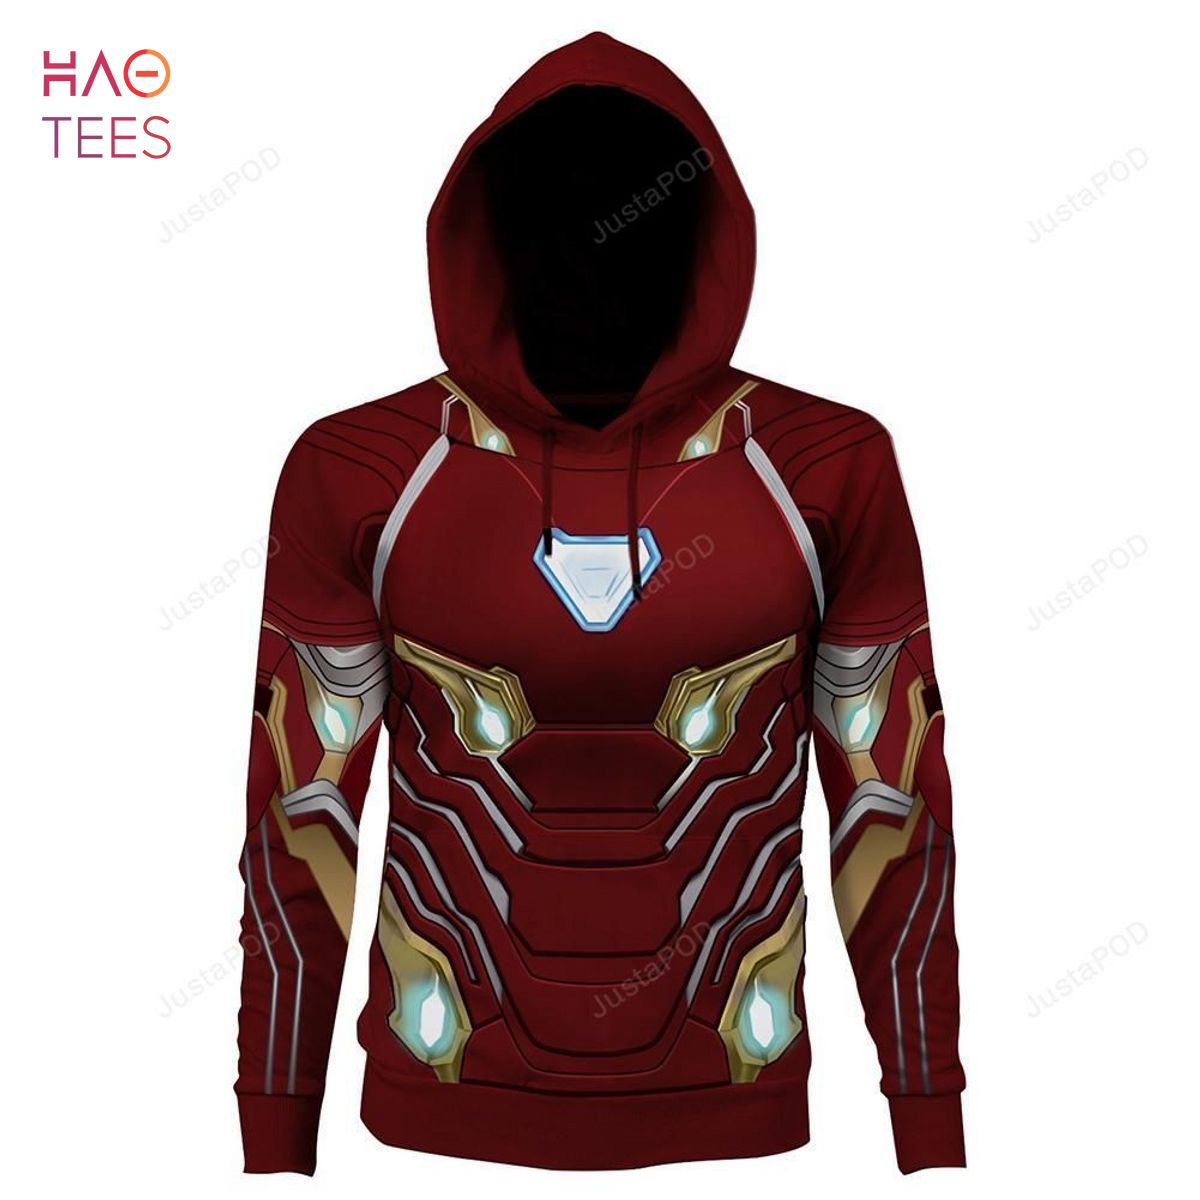 The Avengers Endgame Iron Man Cosplay 3D Hoodie 3D Printed Thin Sports Jacket